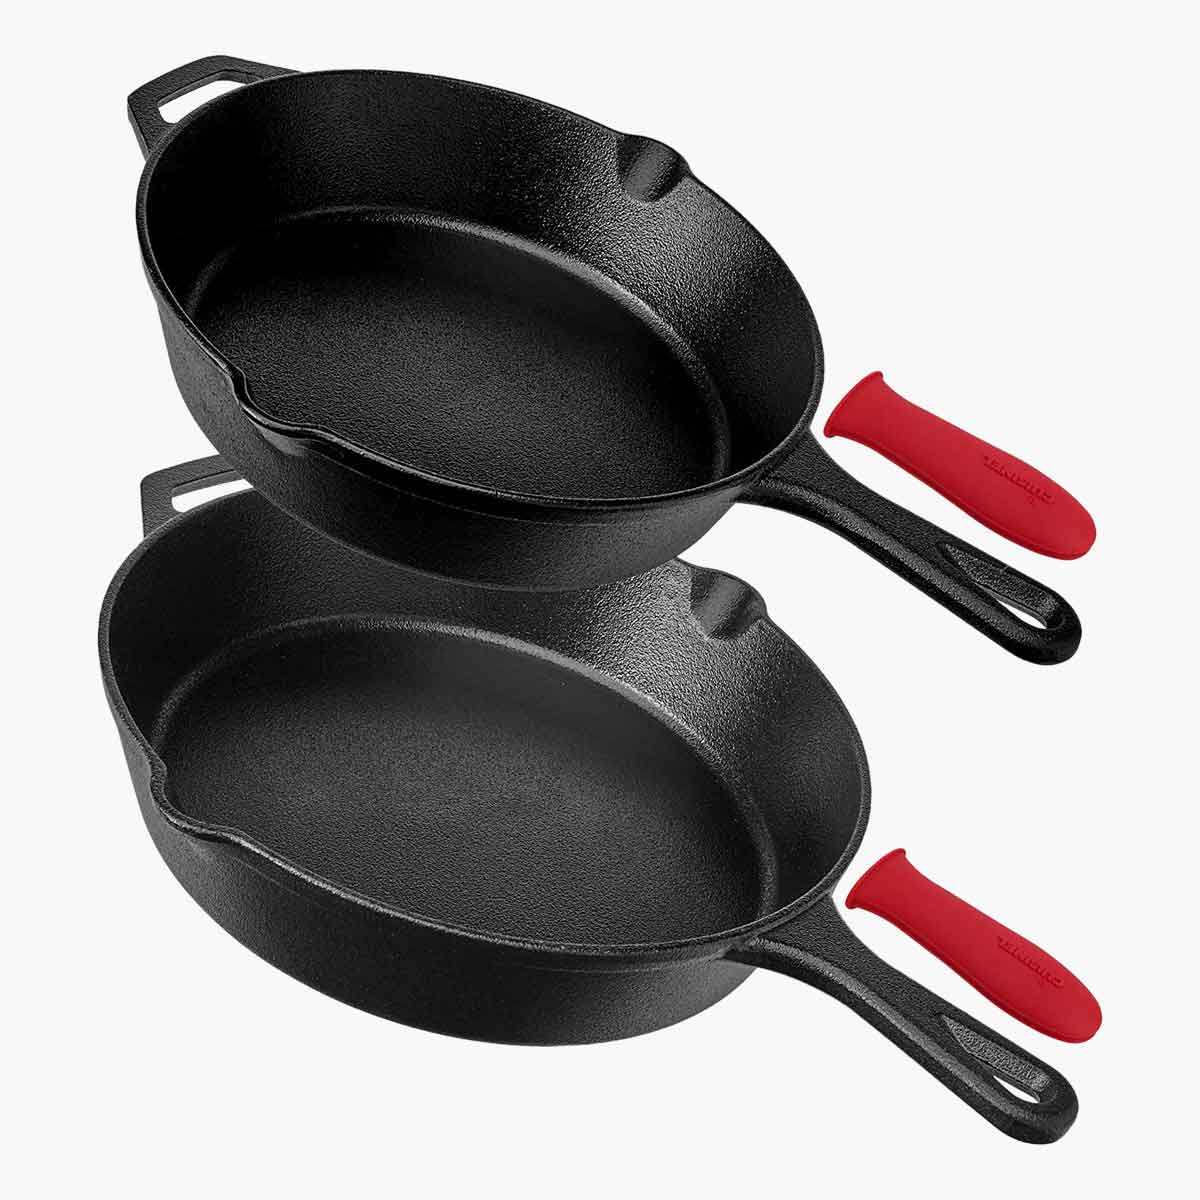 Two cast iron skillets with red silicone protective sleeves.